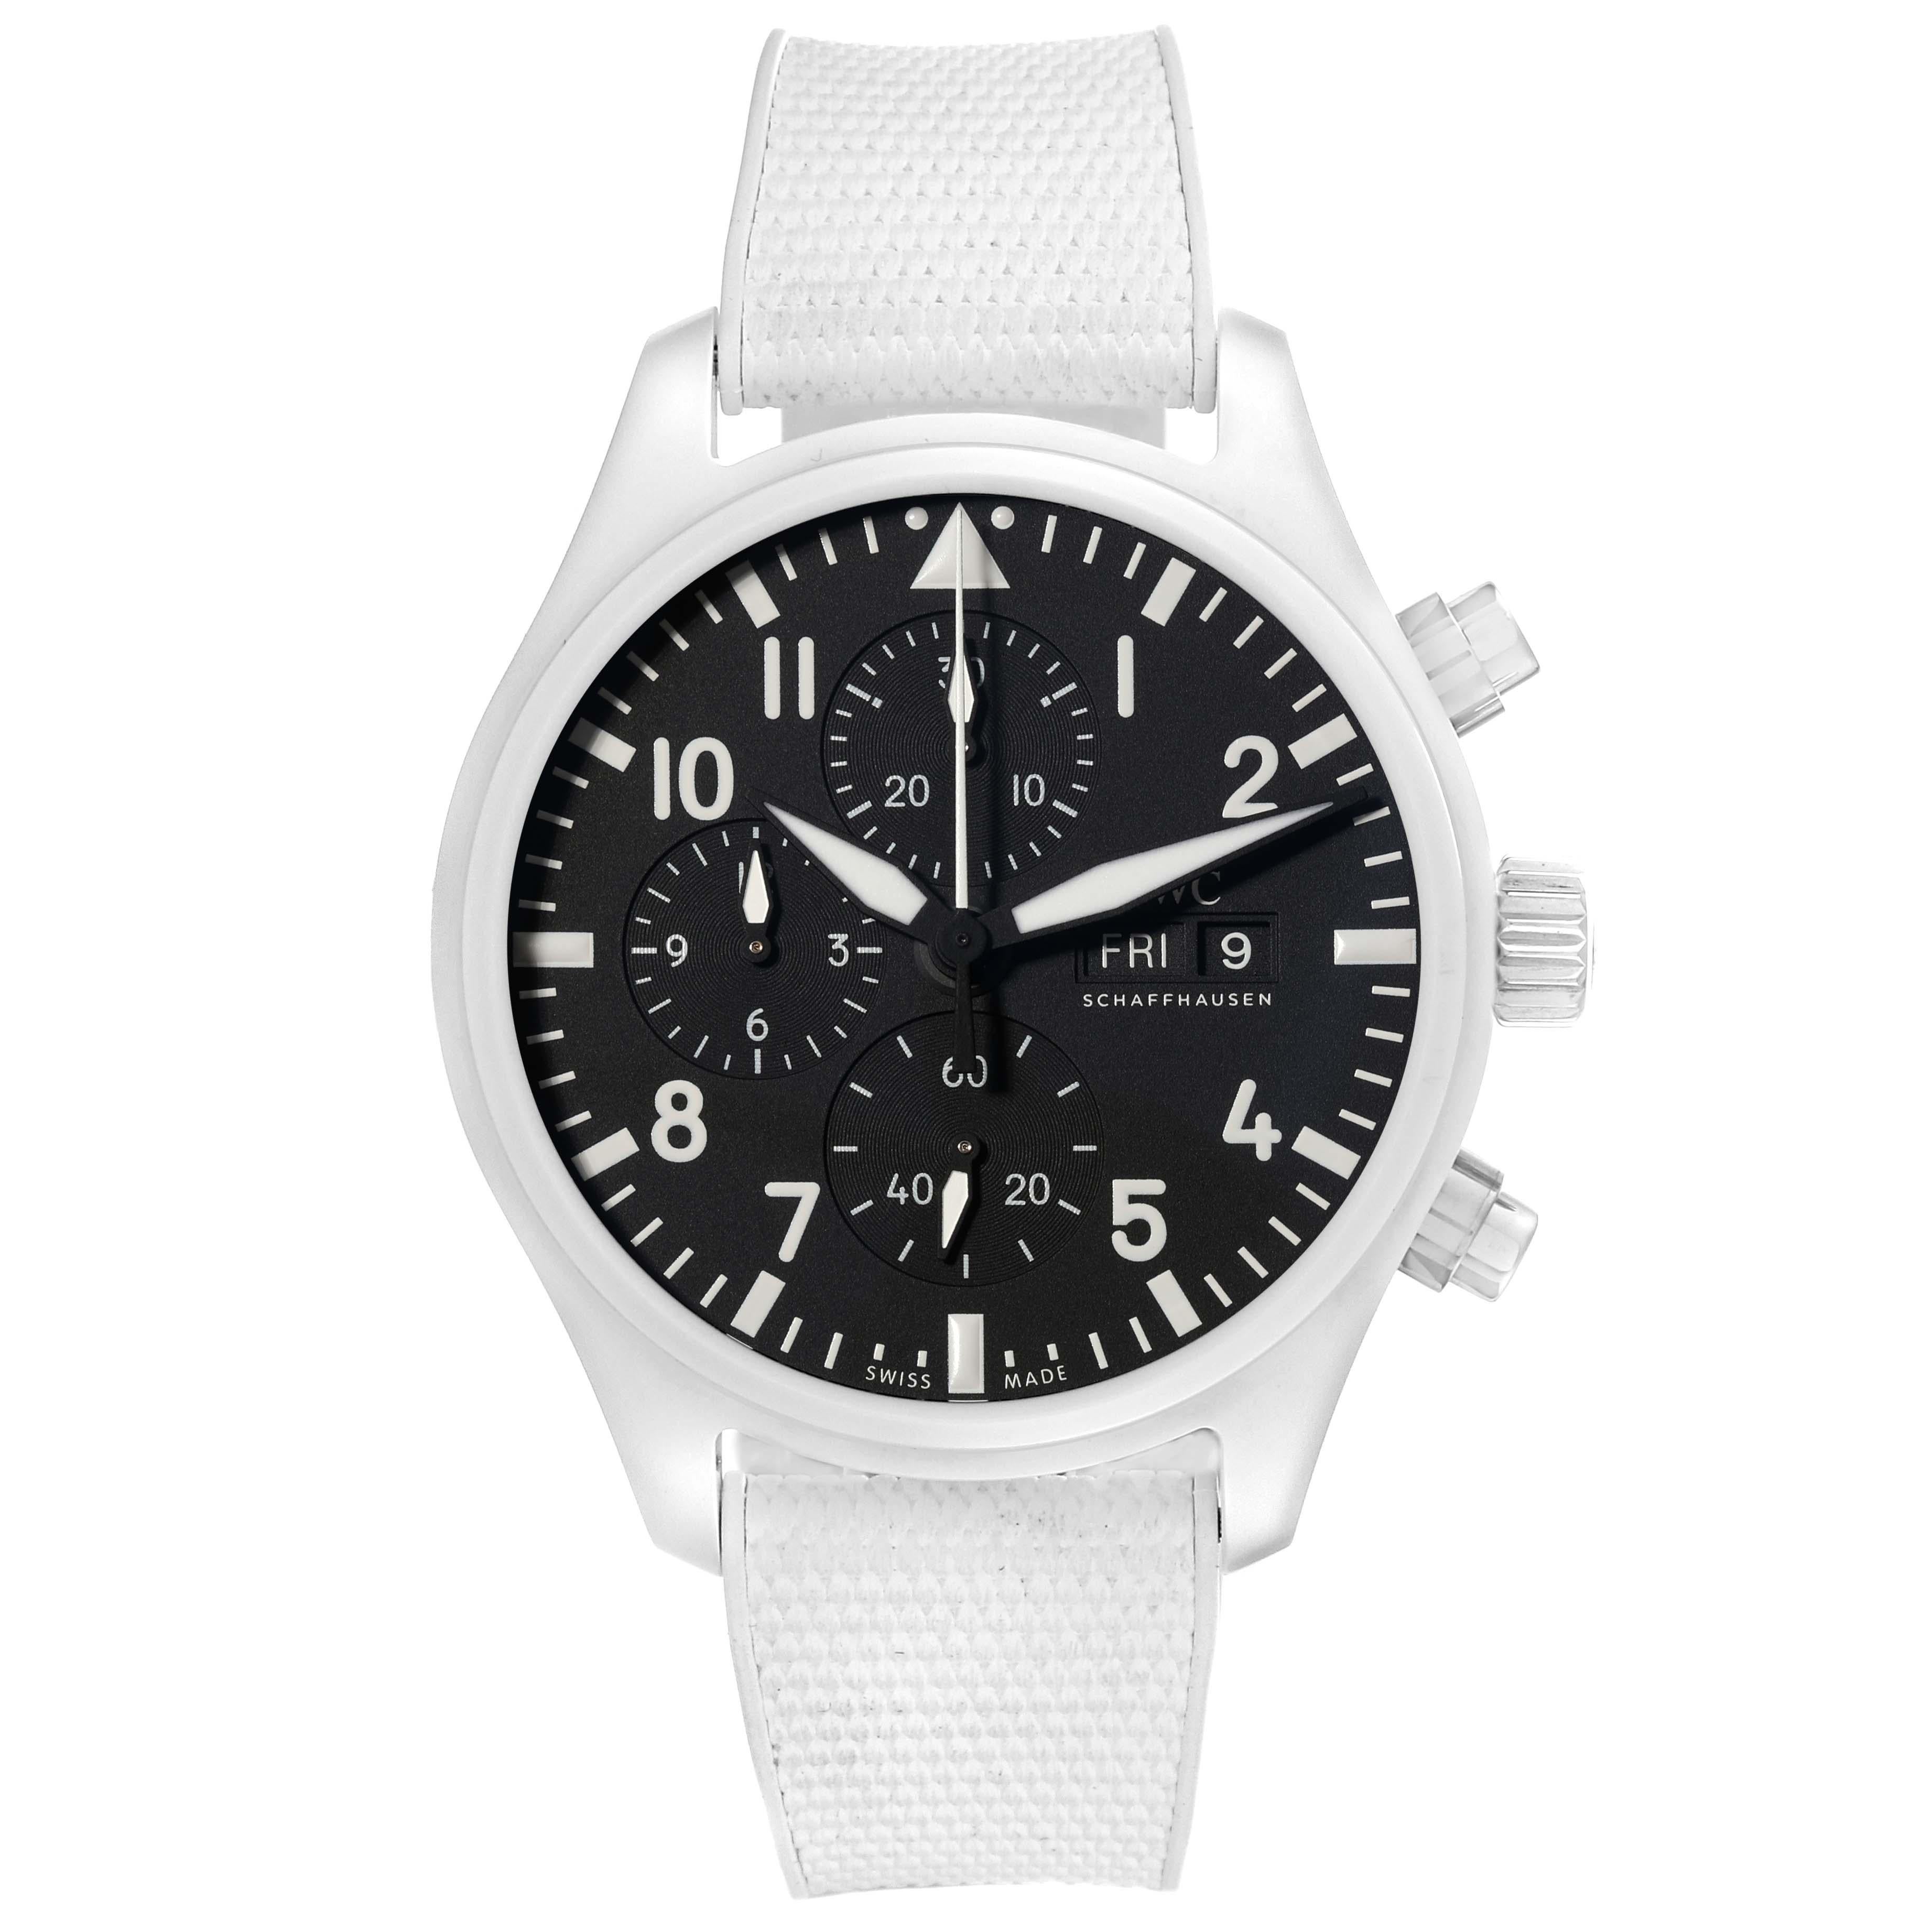 IWC Pilot Top Gun Chronograph Ceramic Mens Watch IW389105. Automatic self-winding chronograph movement. White ceramic case case 44.5 mm in diameter. Screw in crown. Soft-iron inner case for protection against magnetic fields. . Scratch resistant